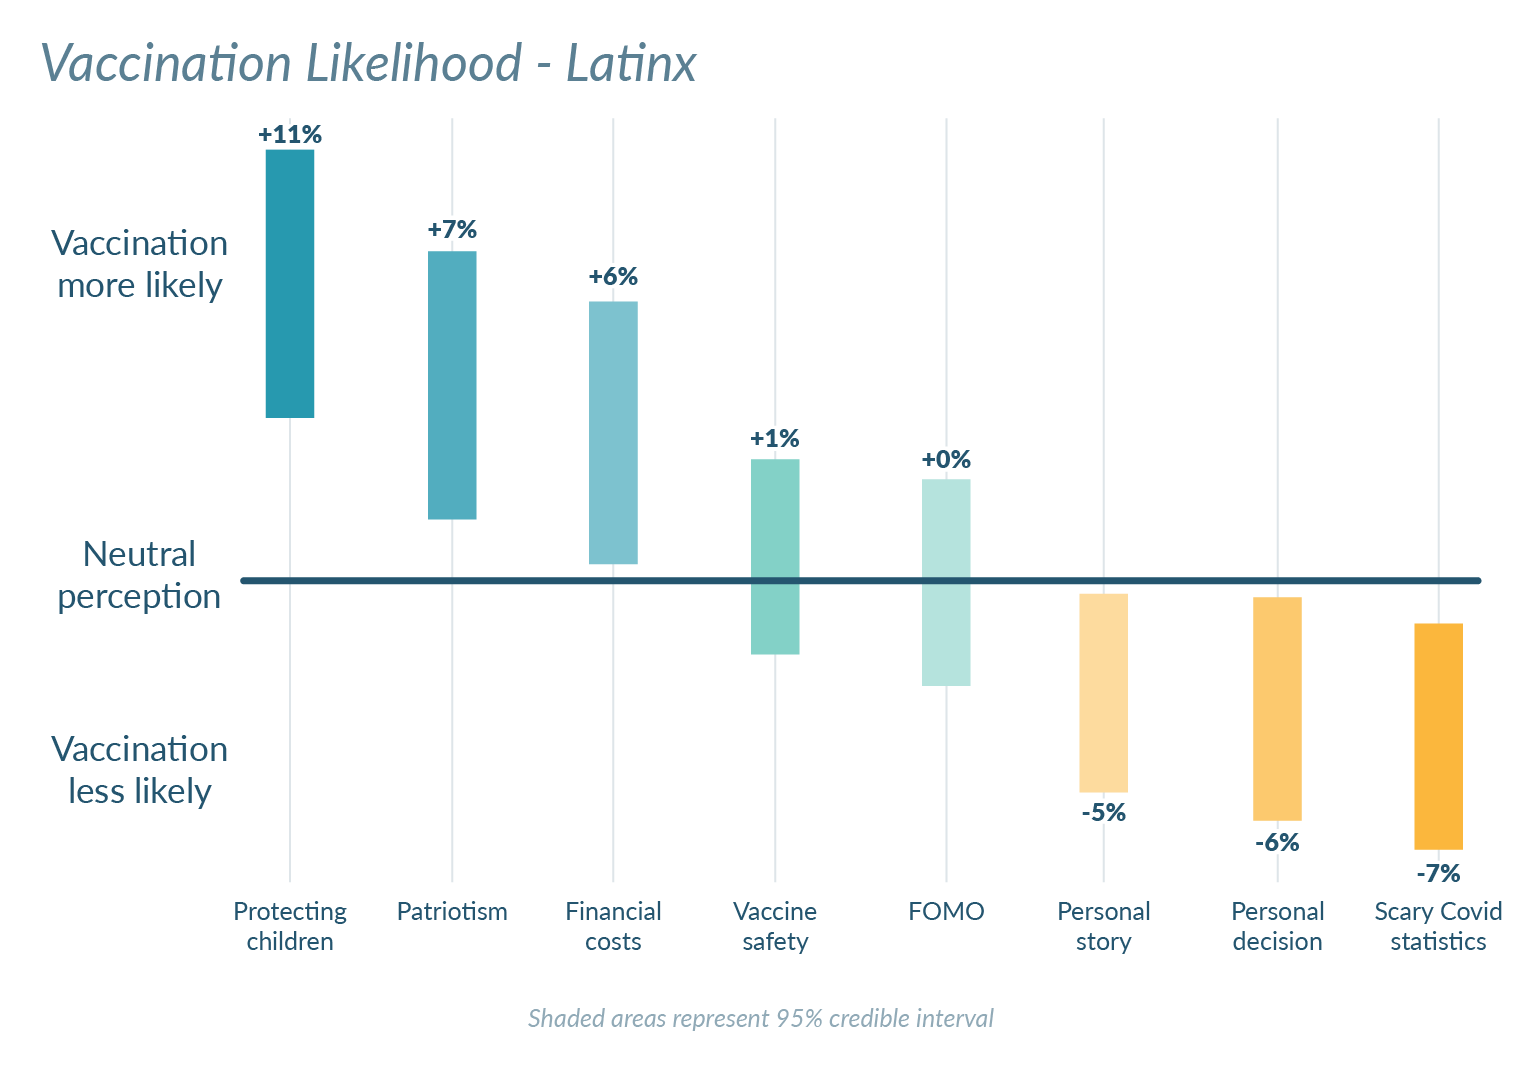 Chart showing which message type was most persuasive for Latinx audiences.